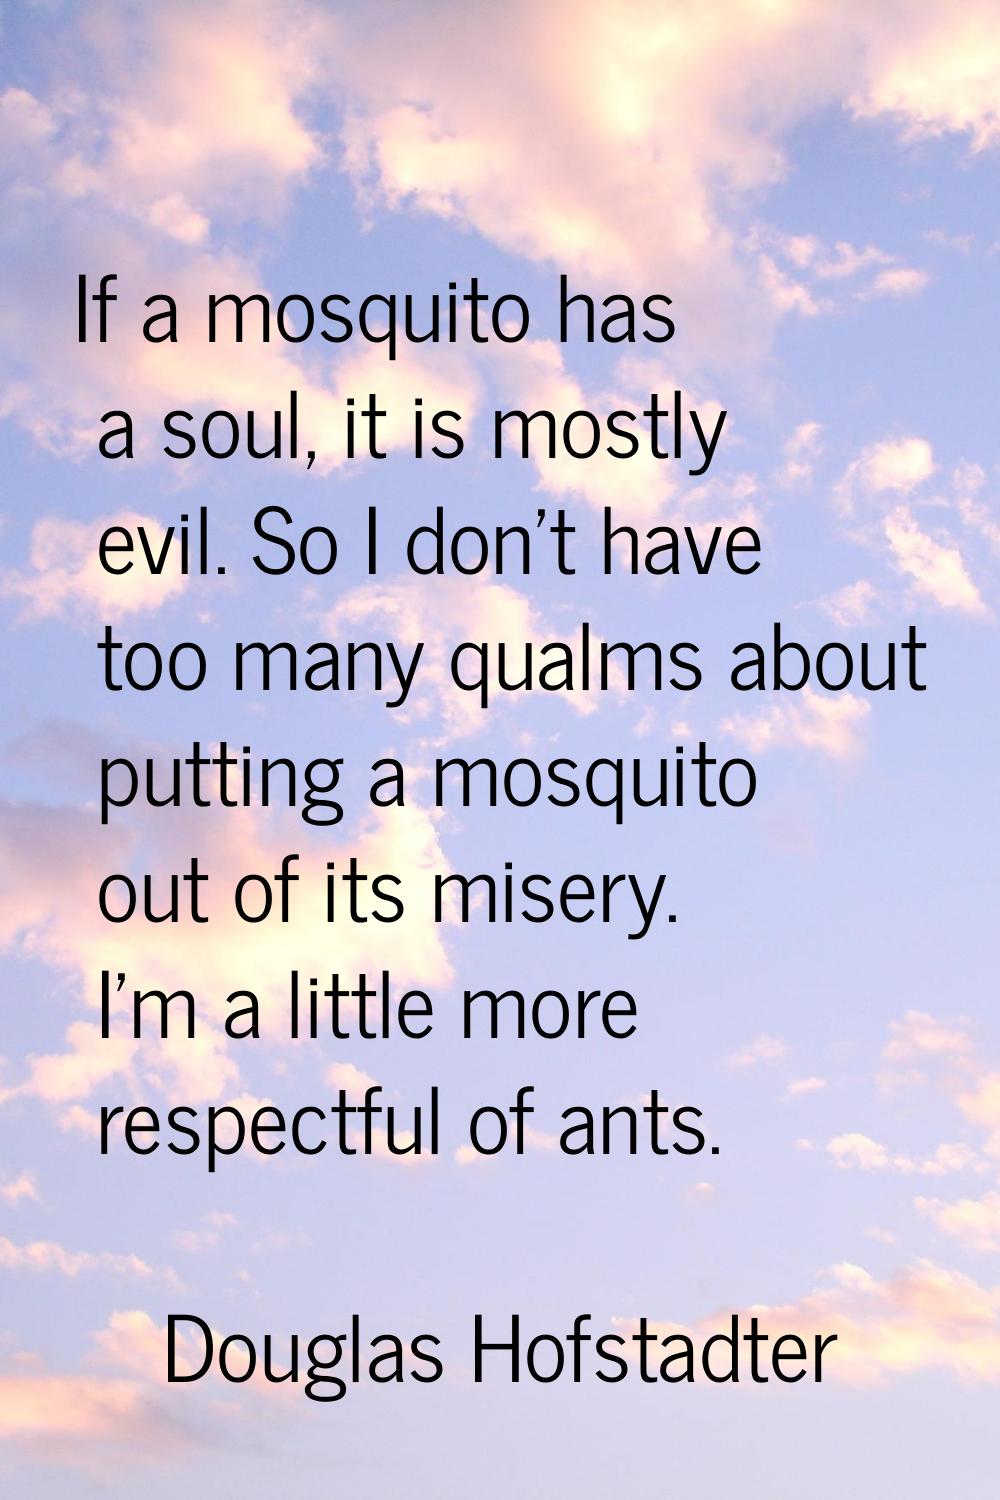 If a mosquito has a soul, it is mostly evil. So I don't have too many qualms about putting a mosqui